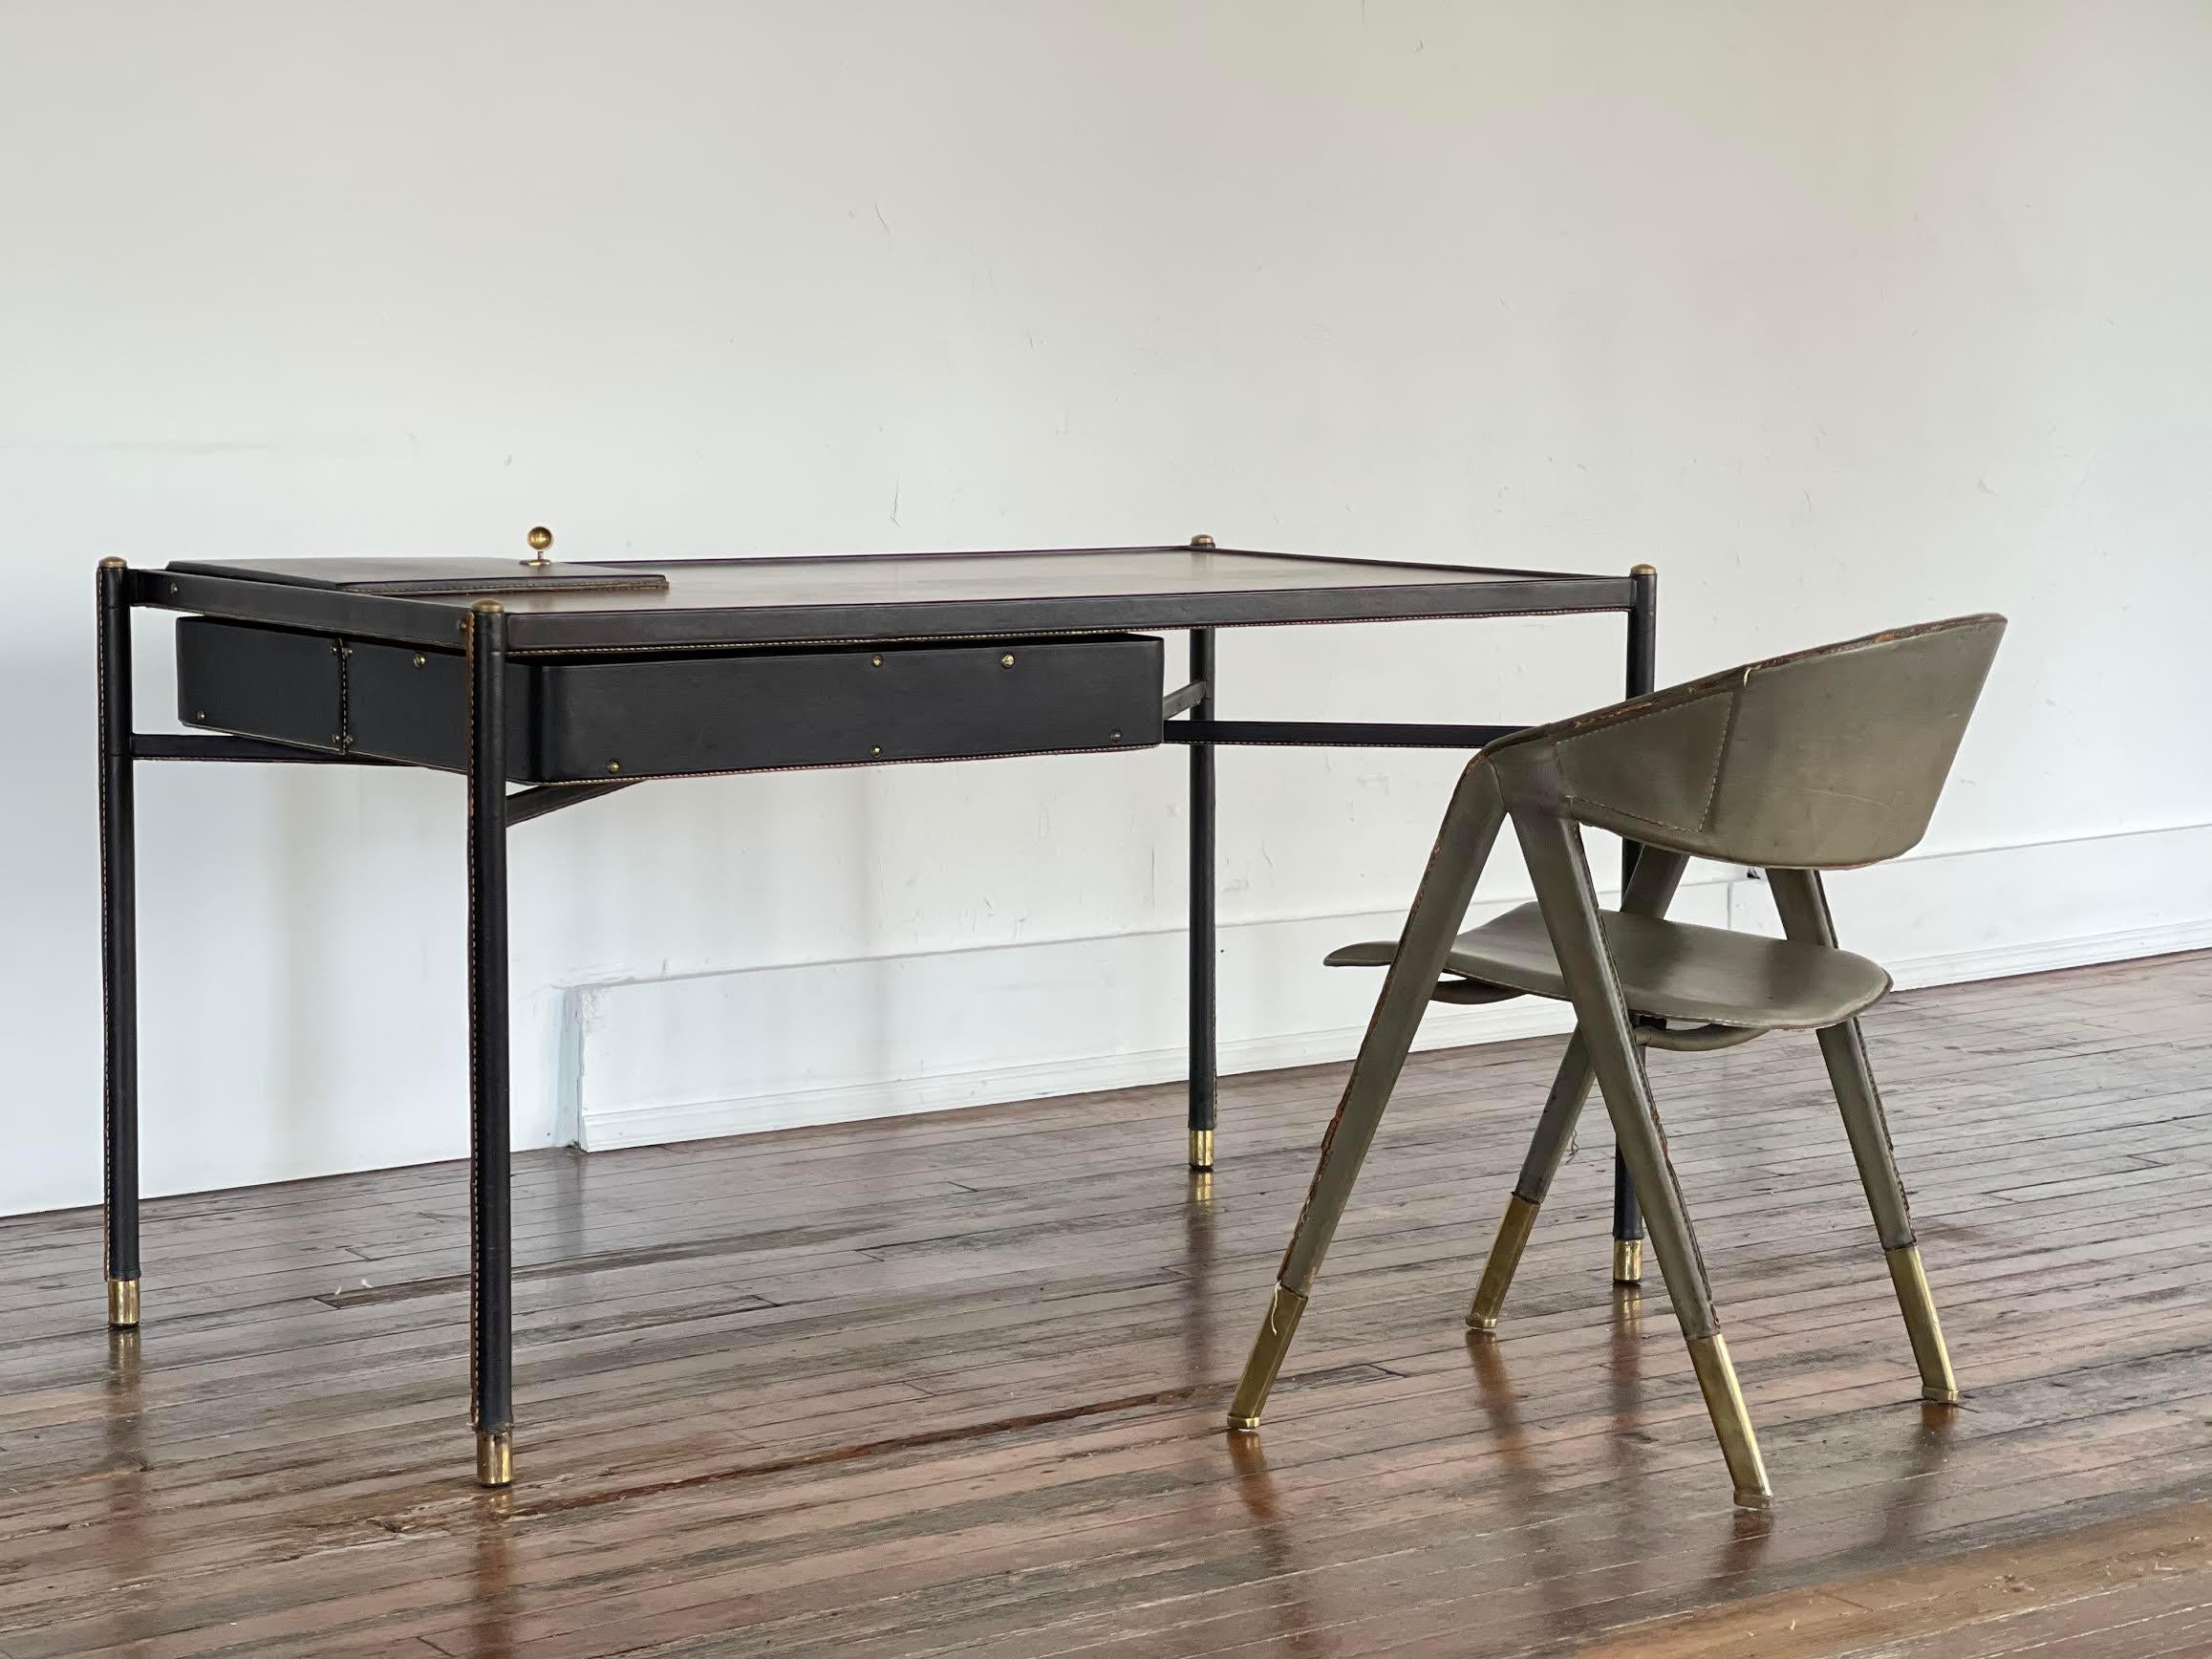 This is an exceptional example of a rare Jacques Adnet writing desk (circa 1950) featuring signature Adnet detailing including; black saddle stitched leather wrapped over a steel frame, patinaed brass hardware, and inset solid Cherry wood top. This